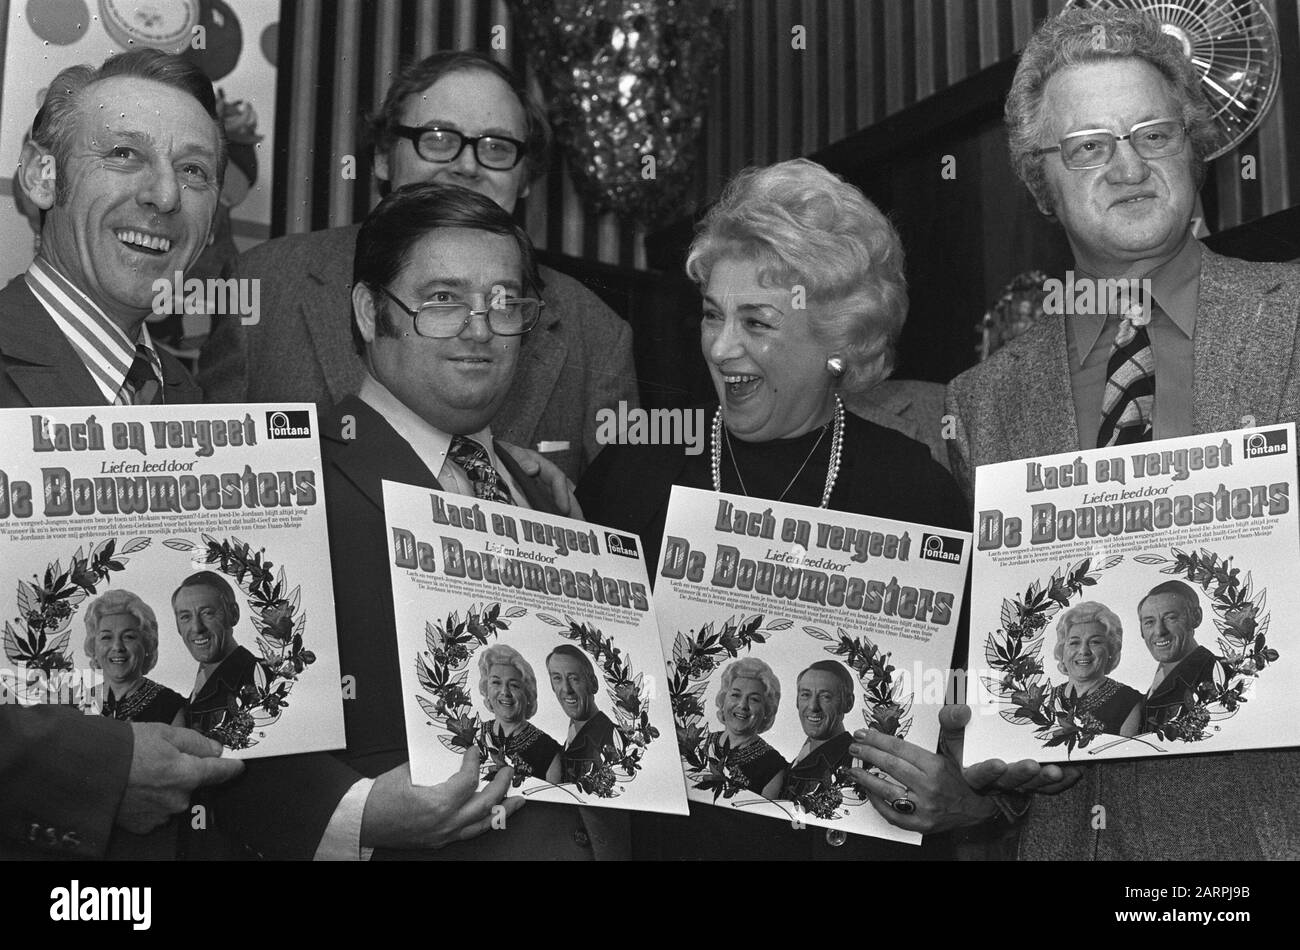 Presentation of an LP by the Bouwmeesters in café Nol in the Jordaan  V.l.n.r. Niek Bouwmeester, Willy Alberti, Bep Bouwmeester and Johnny Jordaan Date: 19 February 1974 Location: Amsterdam, Noord-Holland Keywords: gramophone records Personal name: Alberti, Willy, Architect, Bep, Architect, Niek, Jordaan, Johnny Stock Photo